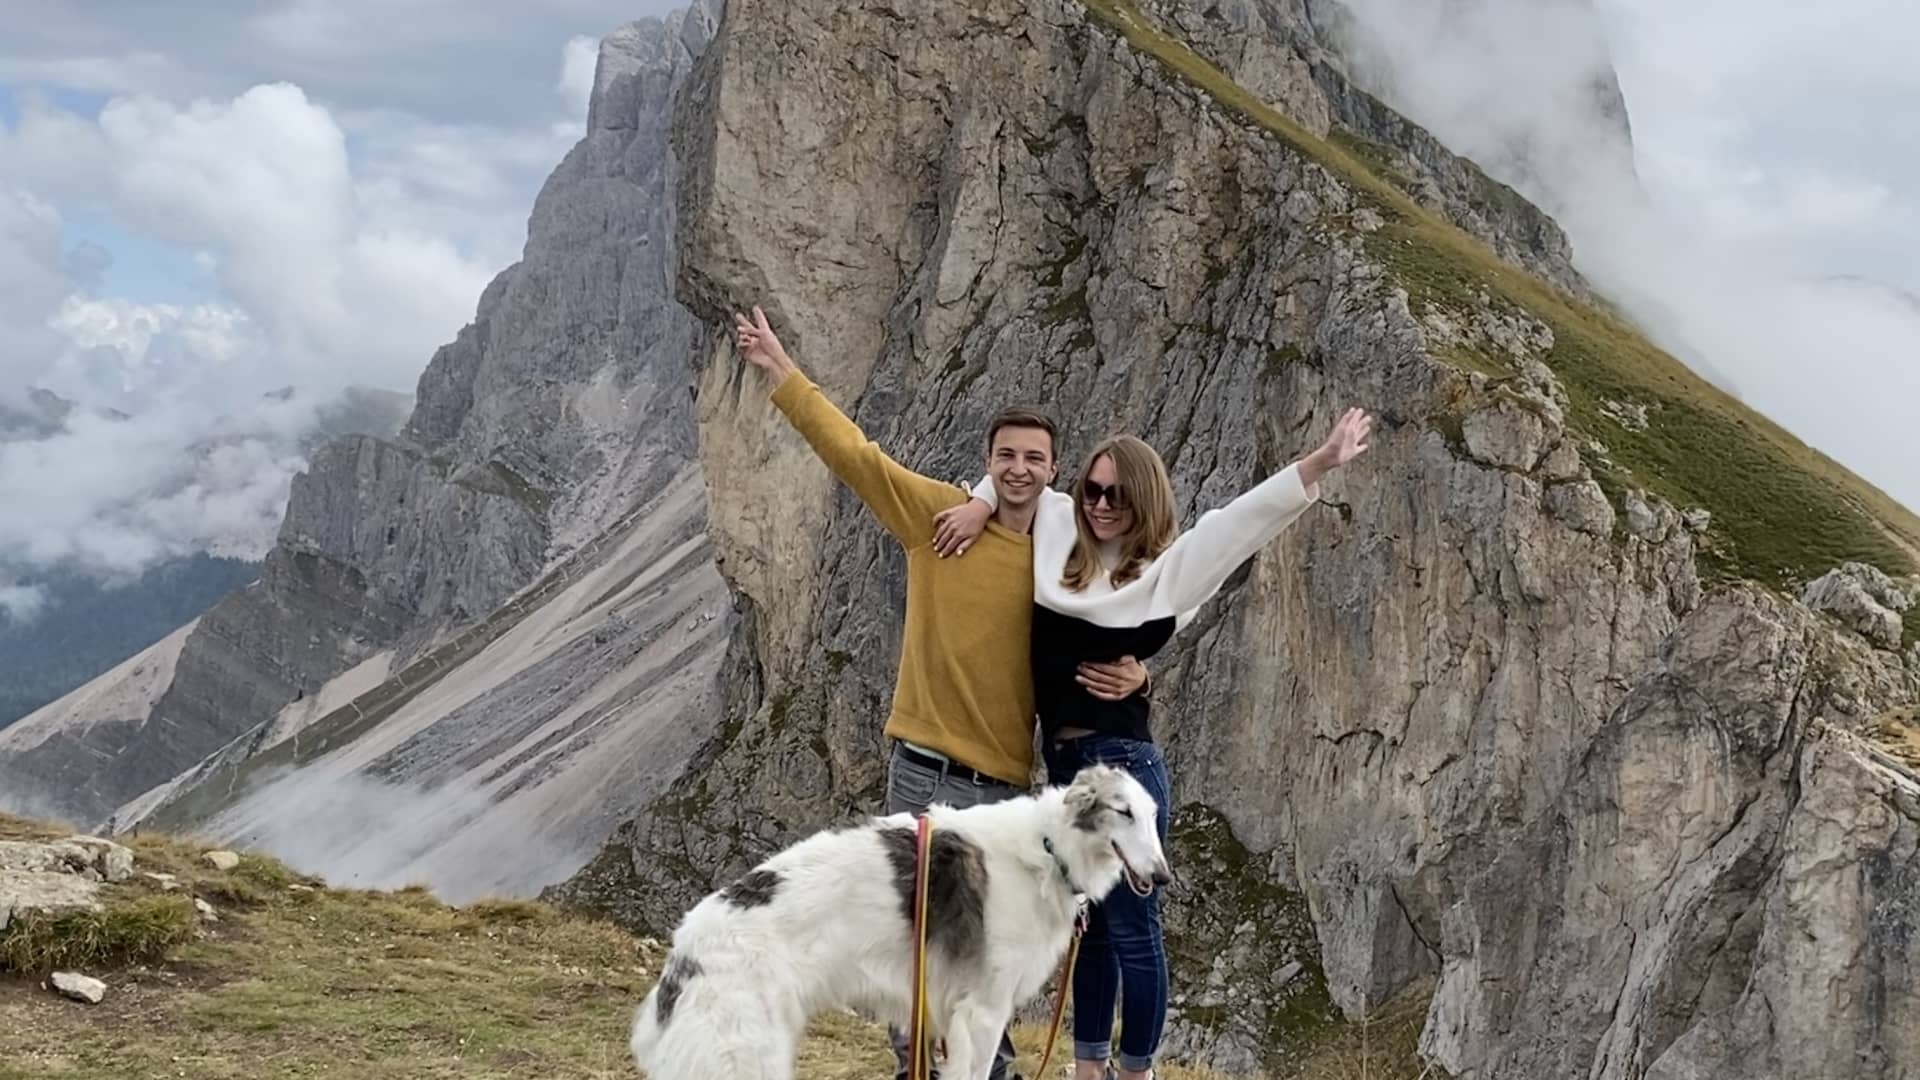 This couple travels the world full time. Here's what it costs - and how they pay for it